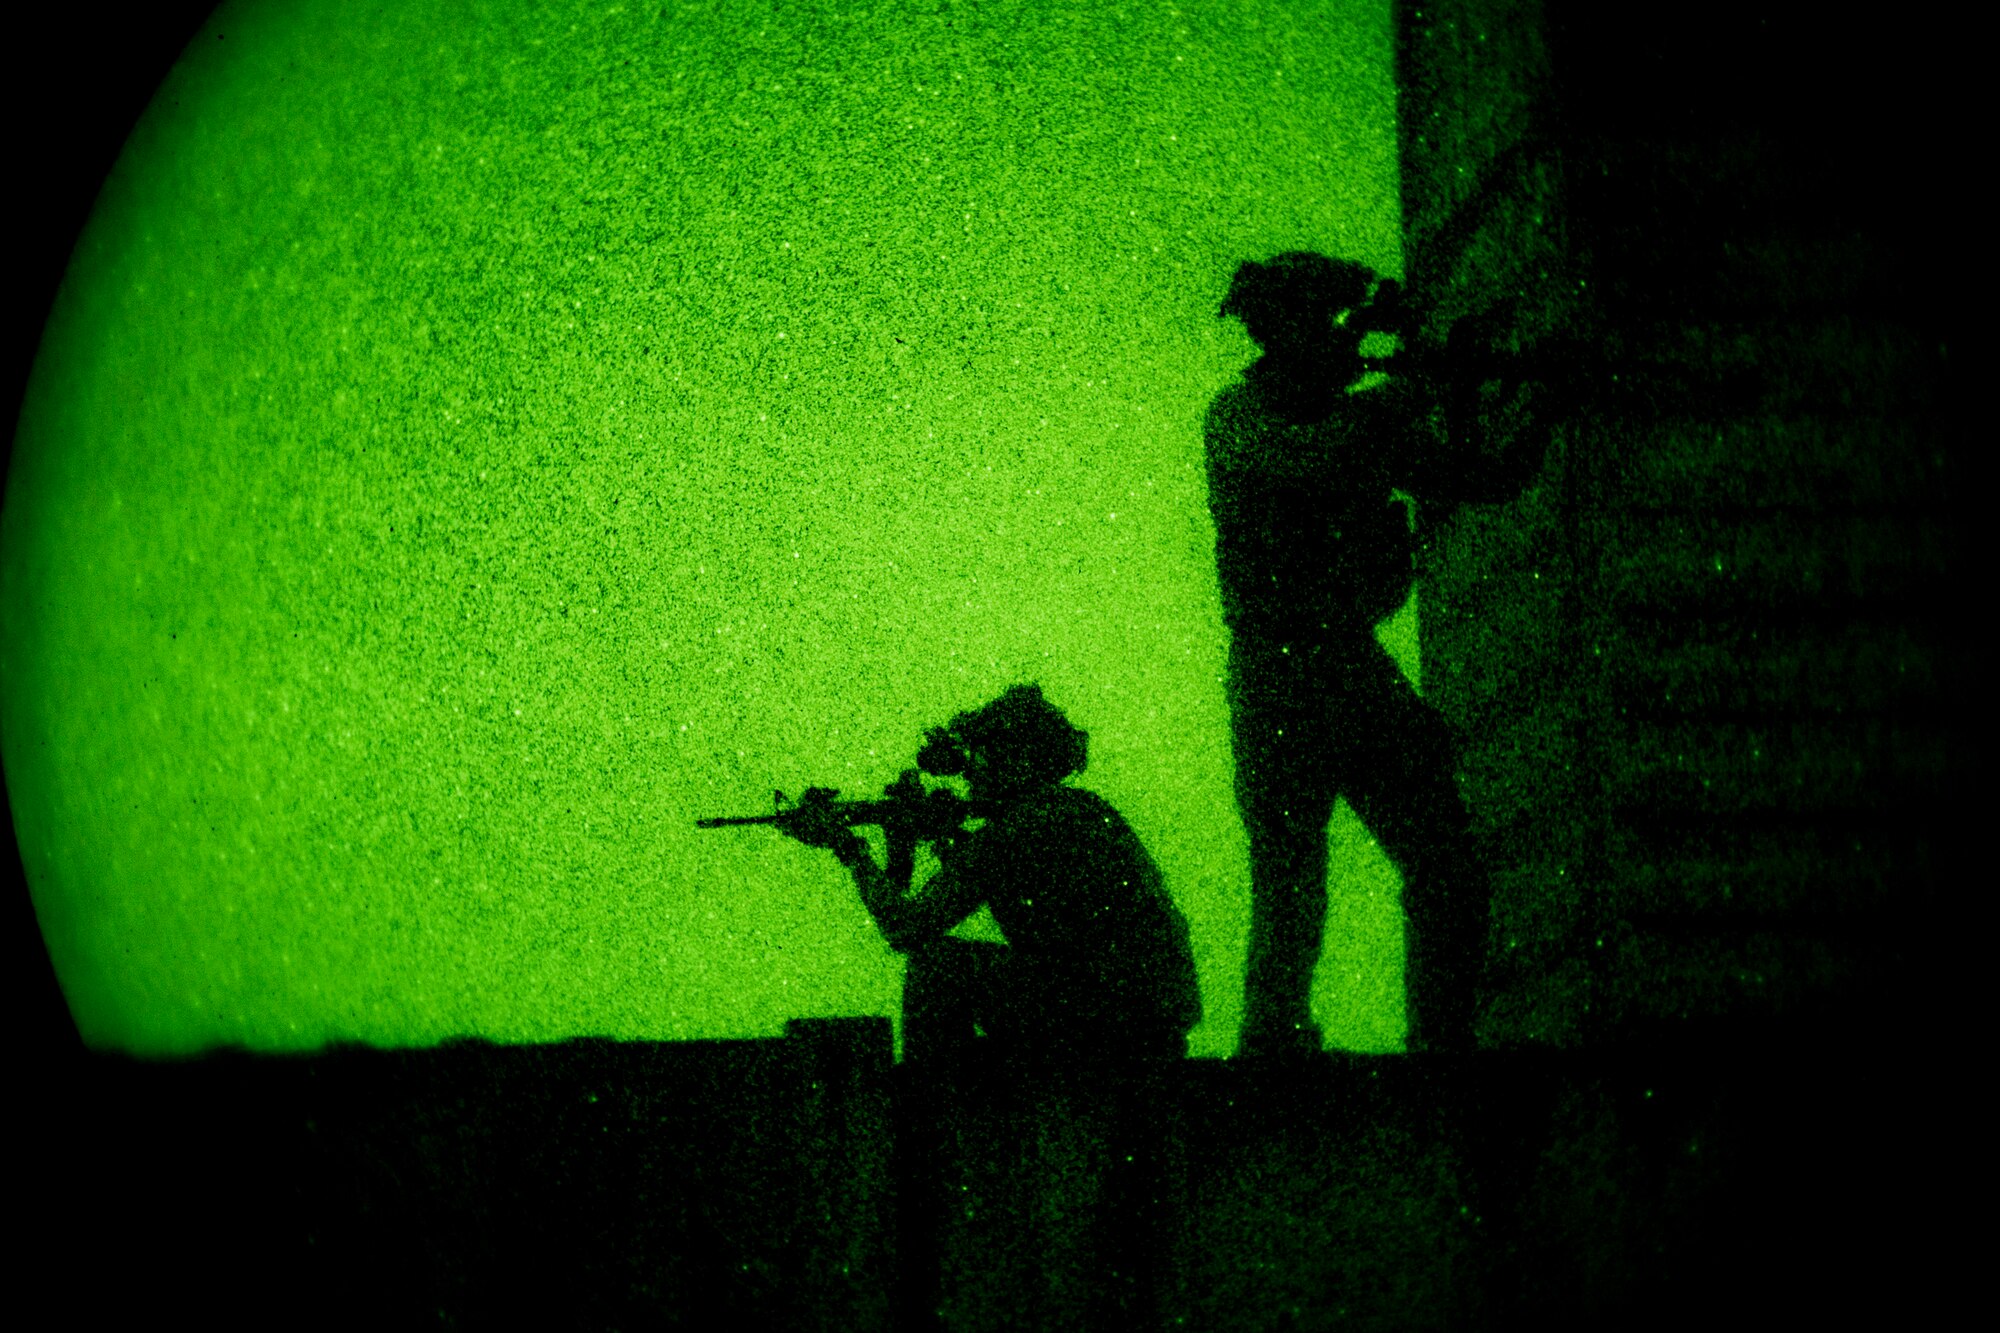 Pararescuemen from the 38th Rescue Squadron secure the perimeter under the cover of darkness during a rescue exercise, June 21, 2017, at Bemiss Field landing zone, Ga. The Air Force Research Laboratory from Wright-Patterson Air Force Base, Ohio and the Baltimore U.S. Air Force Center for Sustainment of Trauma and Readiness Skills, observed Moody's Combat Search and Rescue aeromedical patient processes and survival kit technology, in hopes of reducing risks to improve the overall Air Force mission. (U.S. Air Force photo by Airman 1st Class Daniel Snider)  